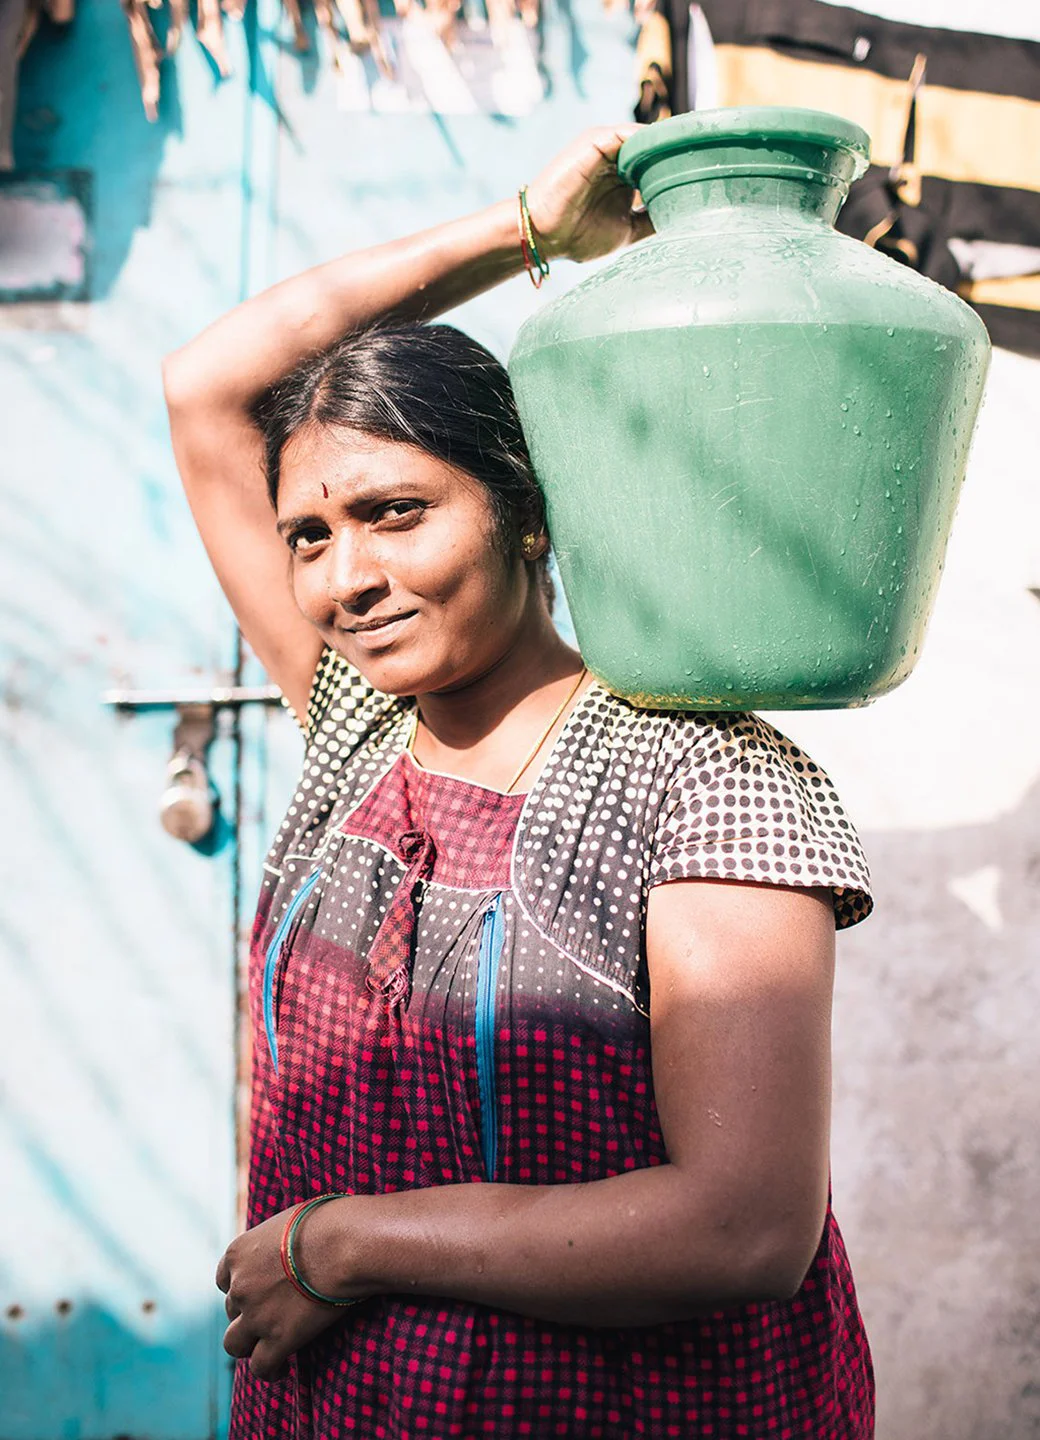 A woman carries a water vessel in Hyderabad, India